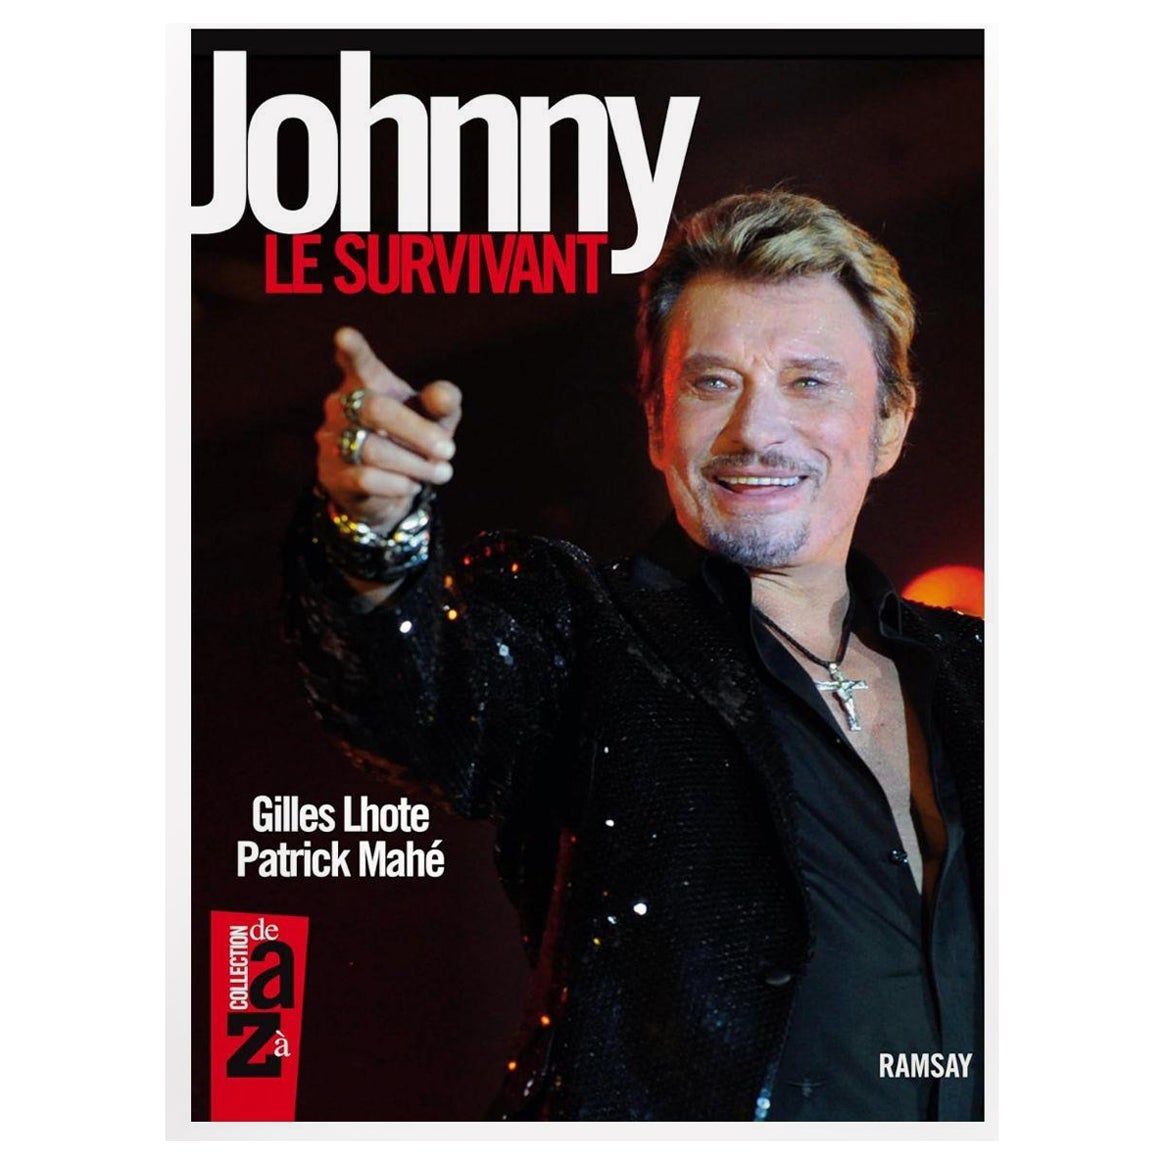 Johnny Halliday Johnny Le Survivant French Edition Paperback 1st Edition For Sale